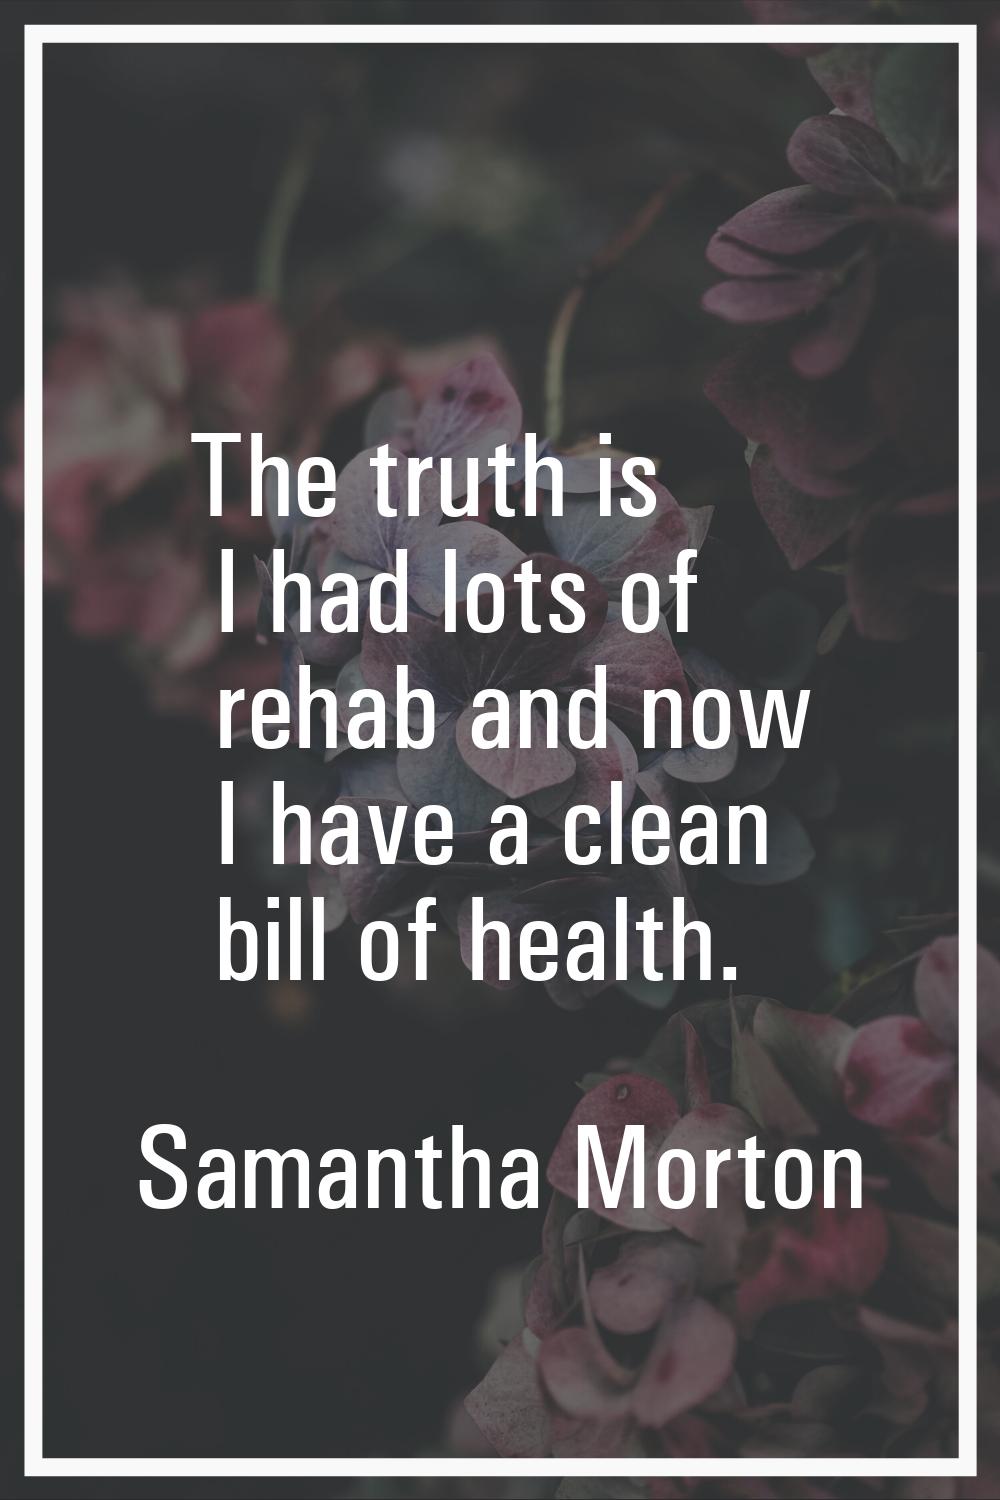 The truth is I had lots of rehab and now I have a clean bill of health.